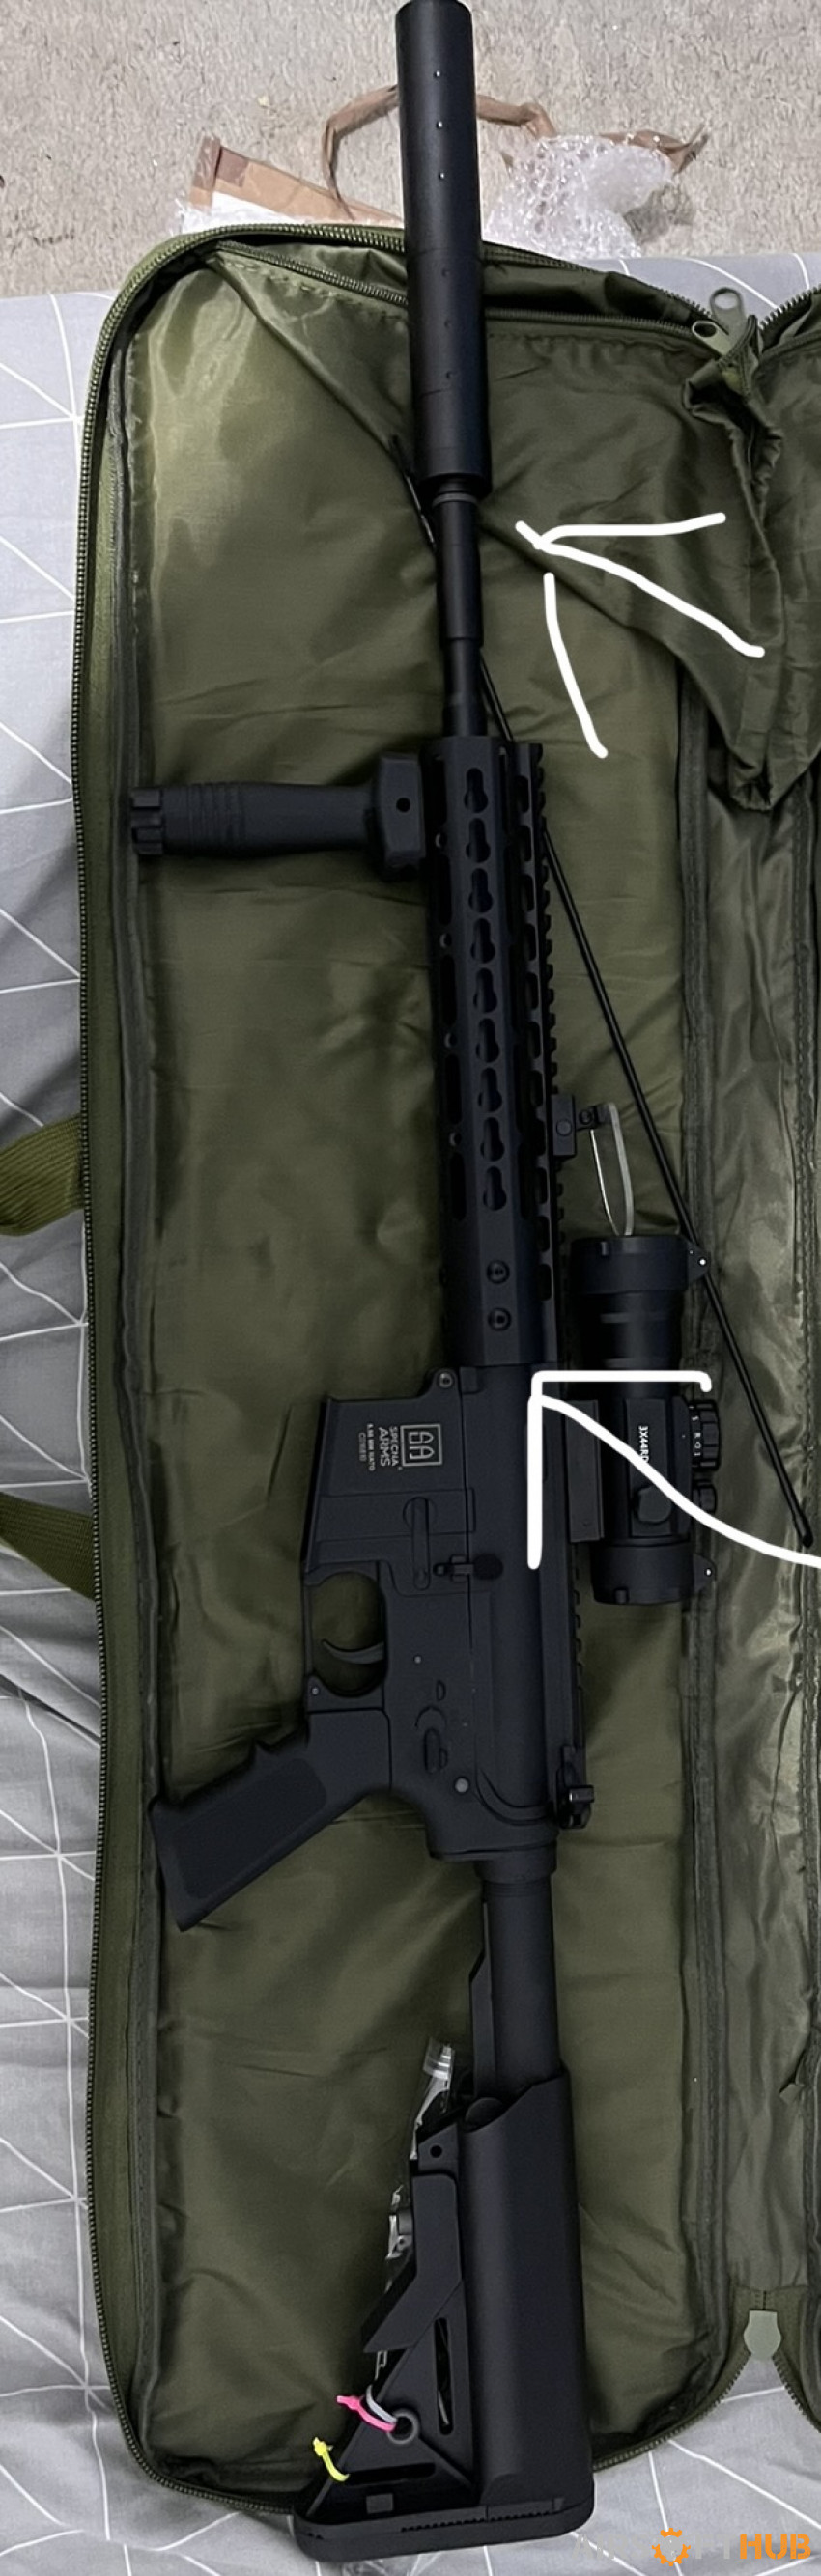 Wanting a quality DMR - Used airsoft equipment